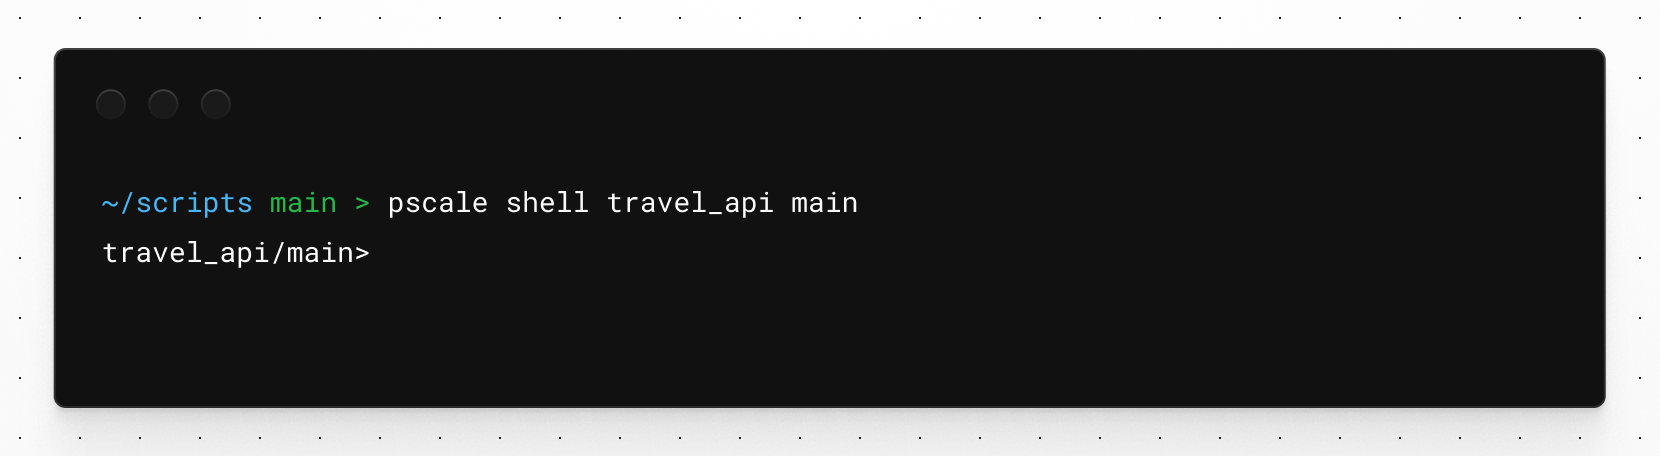 Connecting to the main branch of travel_api using pscale shell